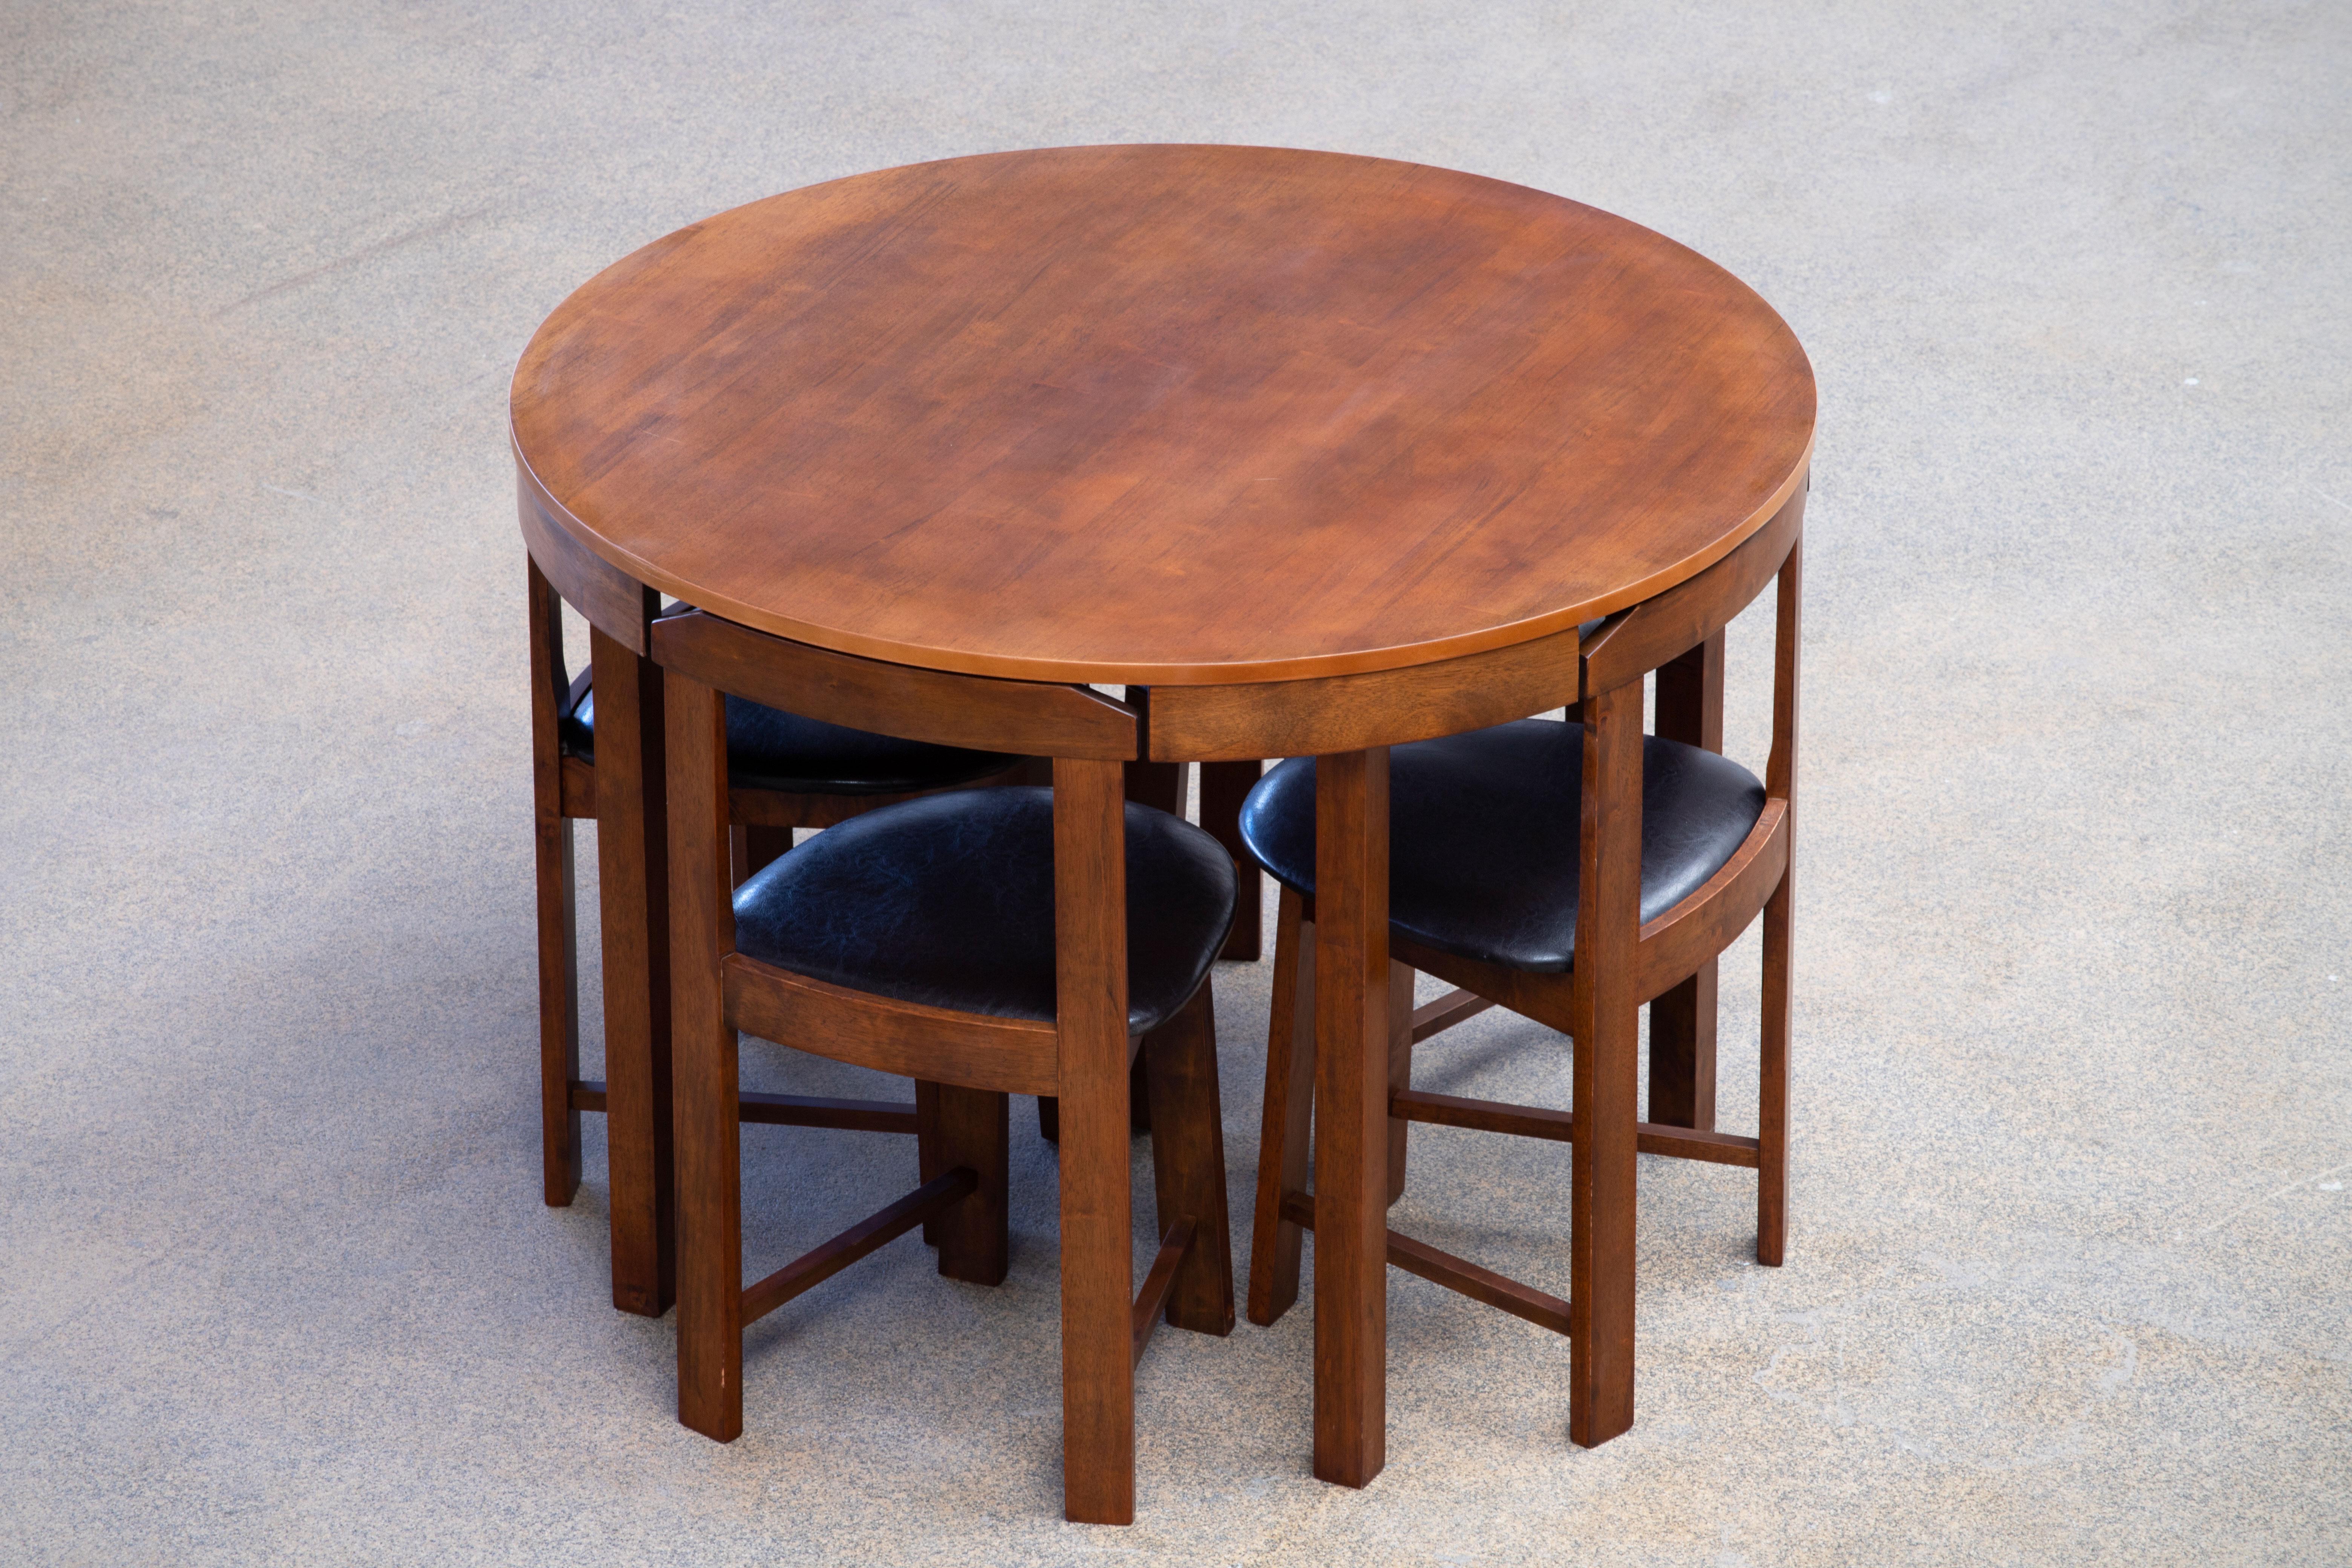 Teak Mid-Century Mordern Built in Table and Chairs Set